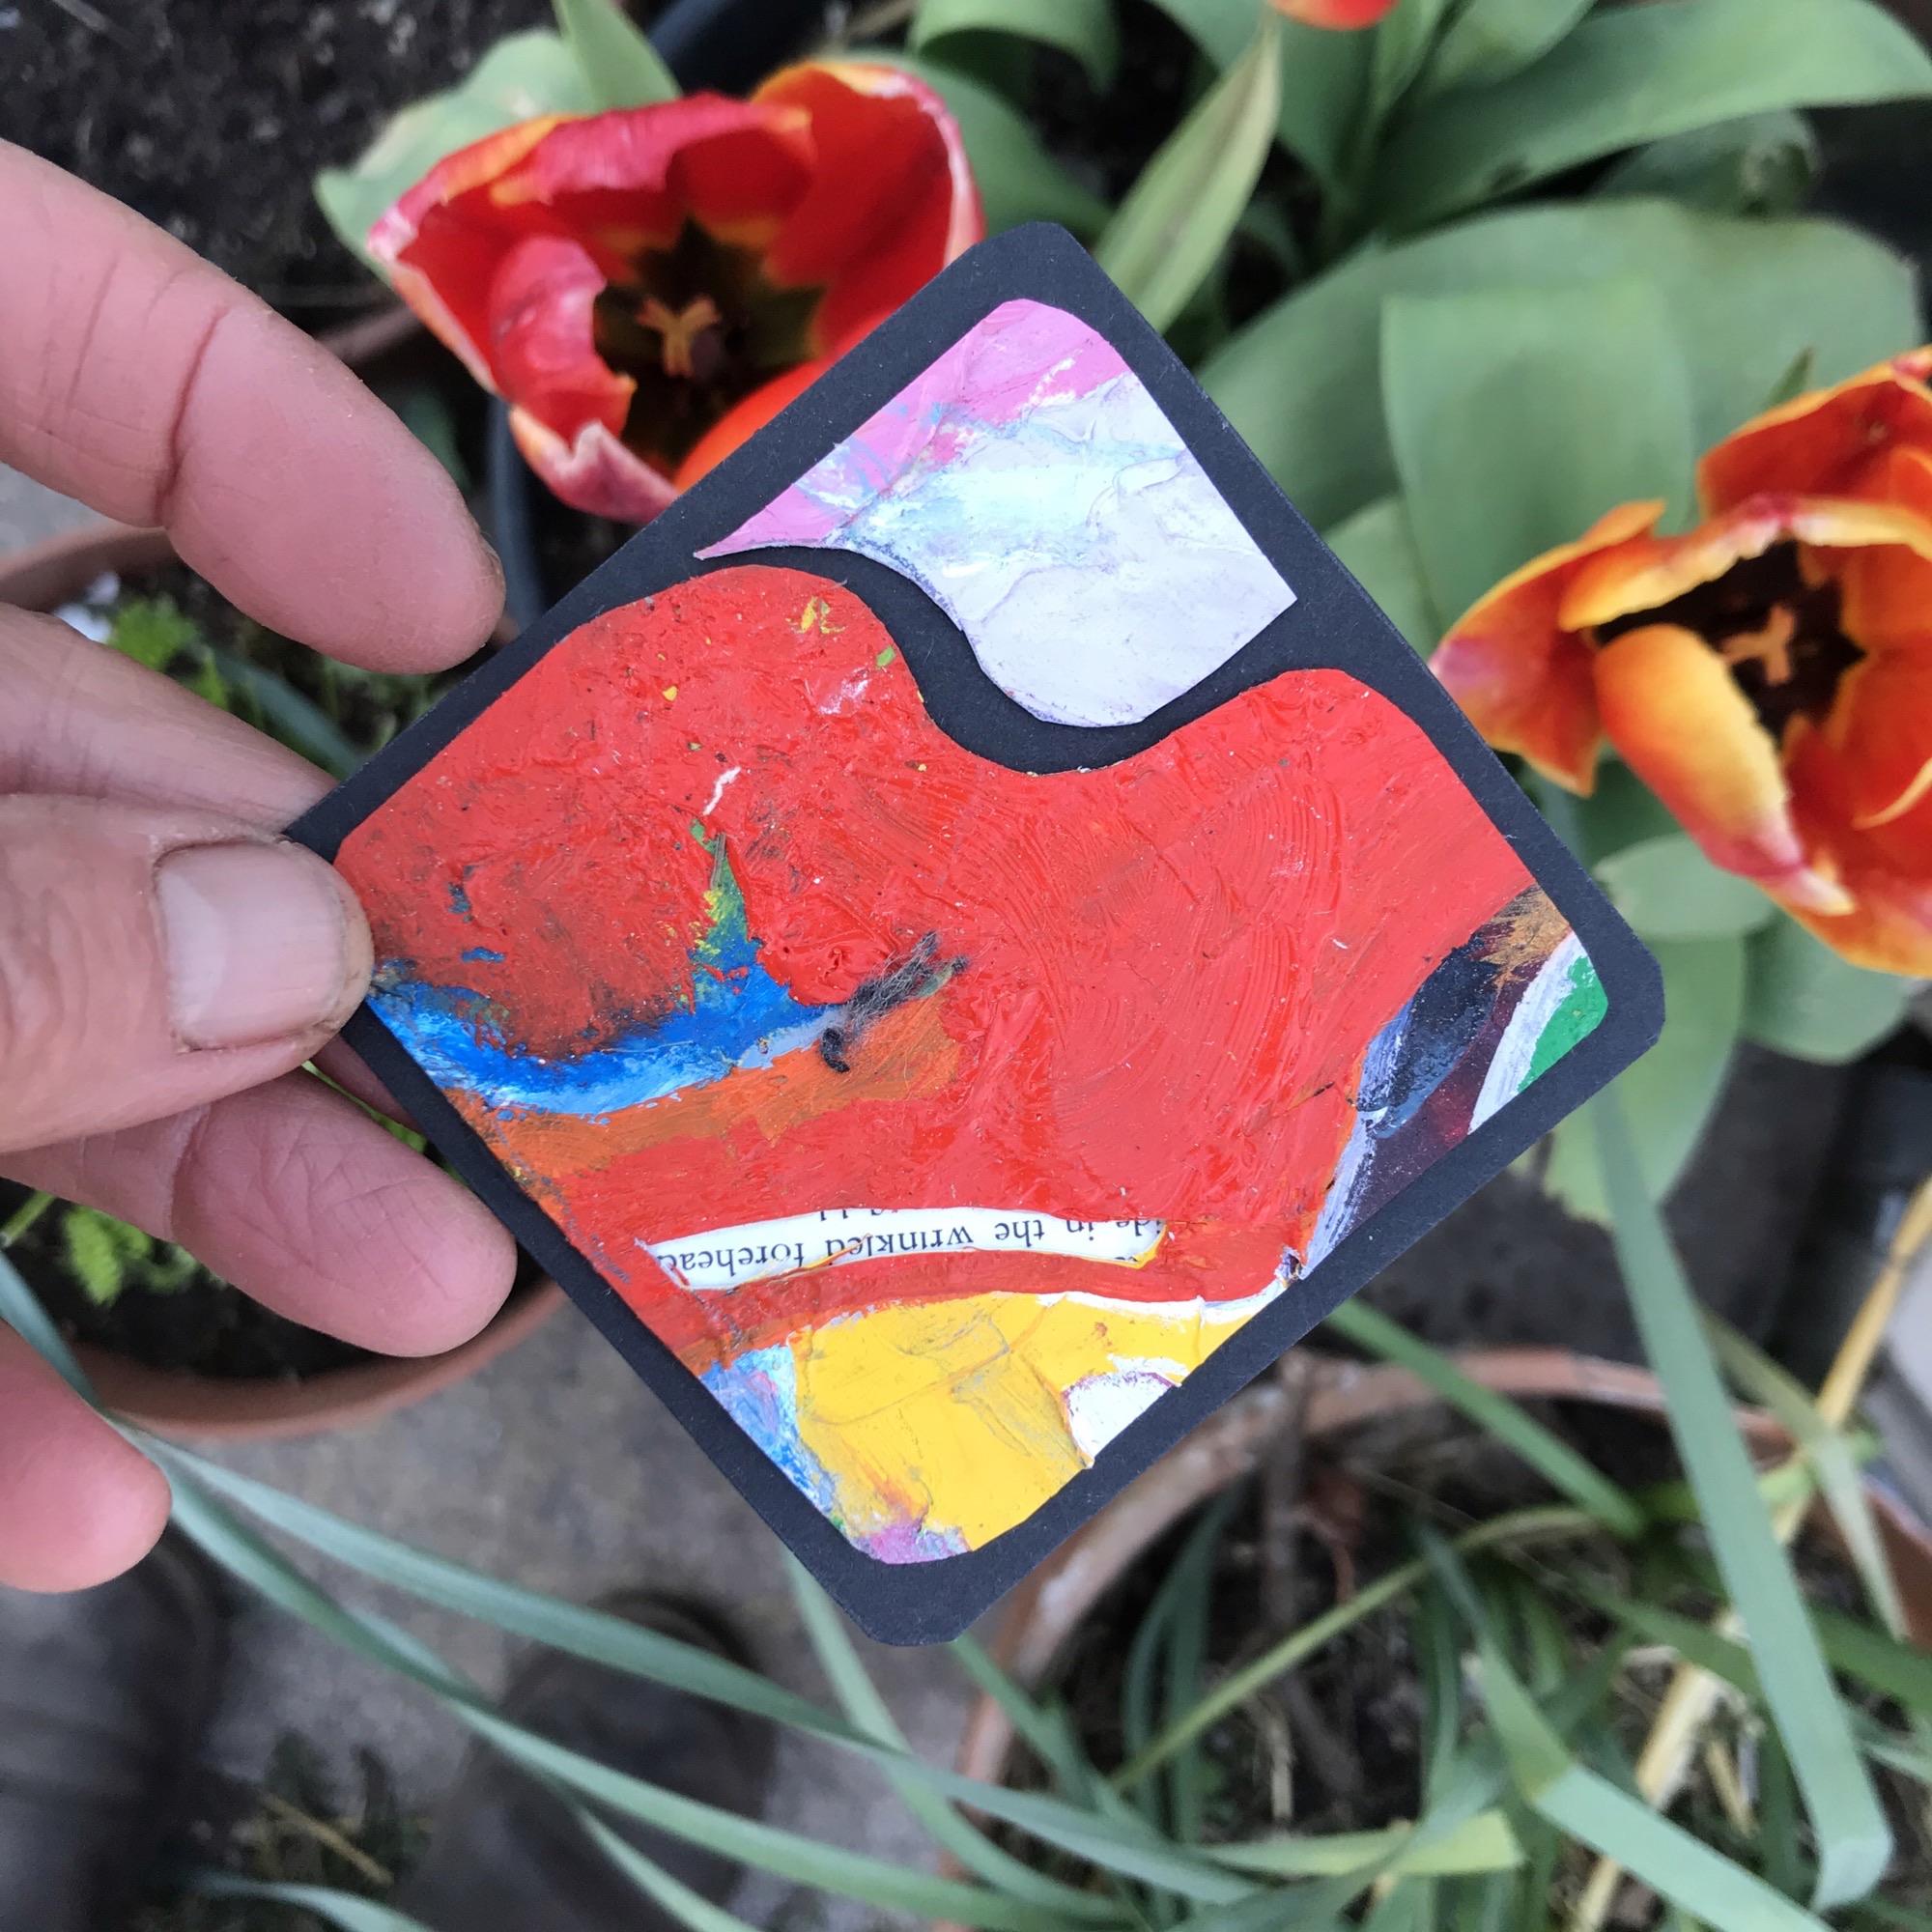 A small square mat, painted into three main sections. The middle section is painted mostly red with a splash of blue. The top section is silver with a slither of pink and the bottom section is a mixture of yellow, blue, pink, silver, red, orange and green. This mat is being handheld above two bright tulips outside.